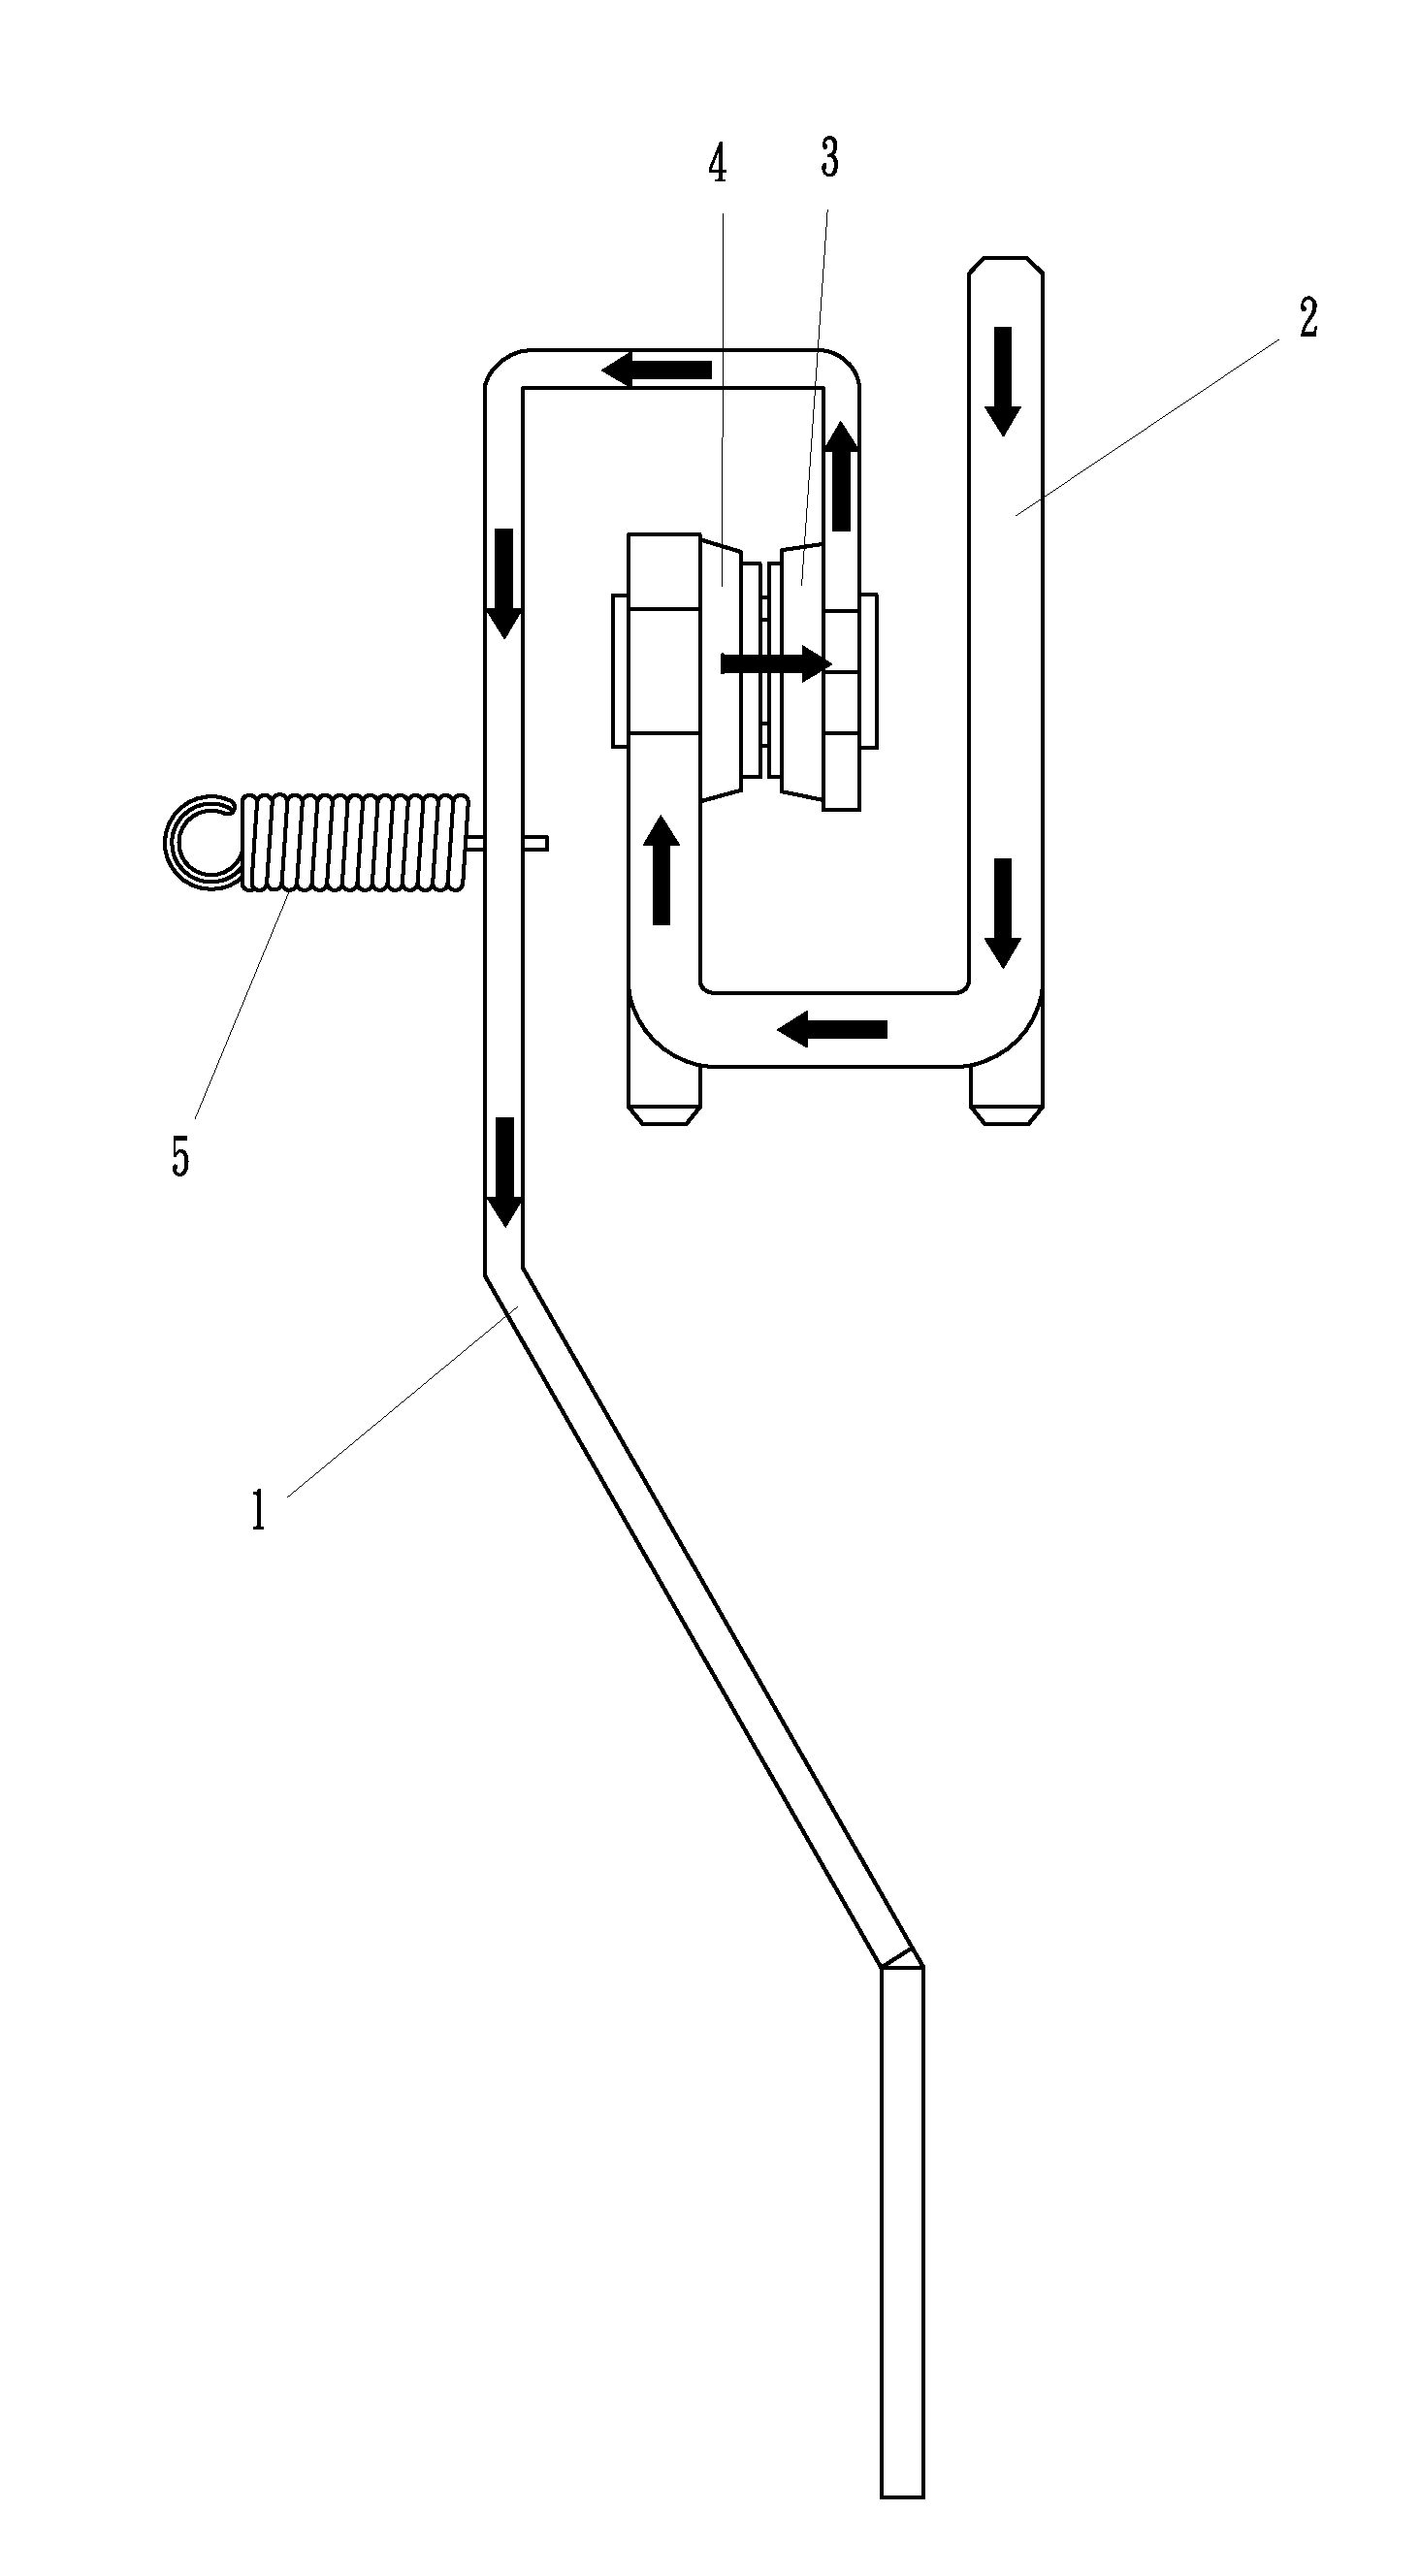 Reed switch assembly of magnetic latching relay